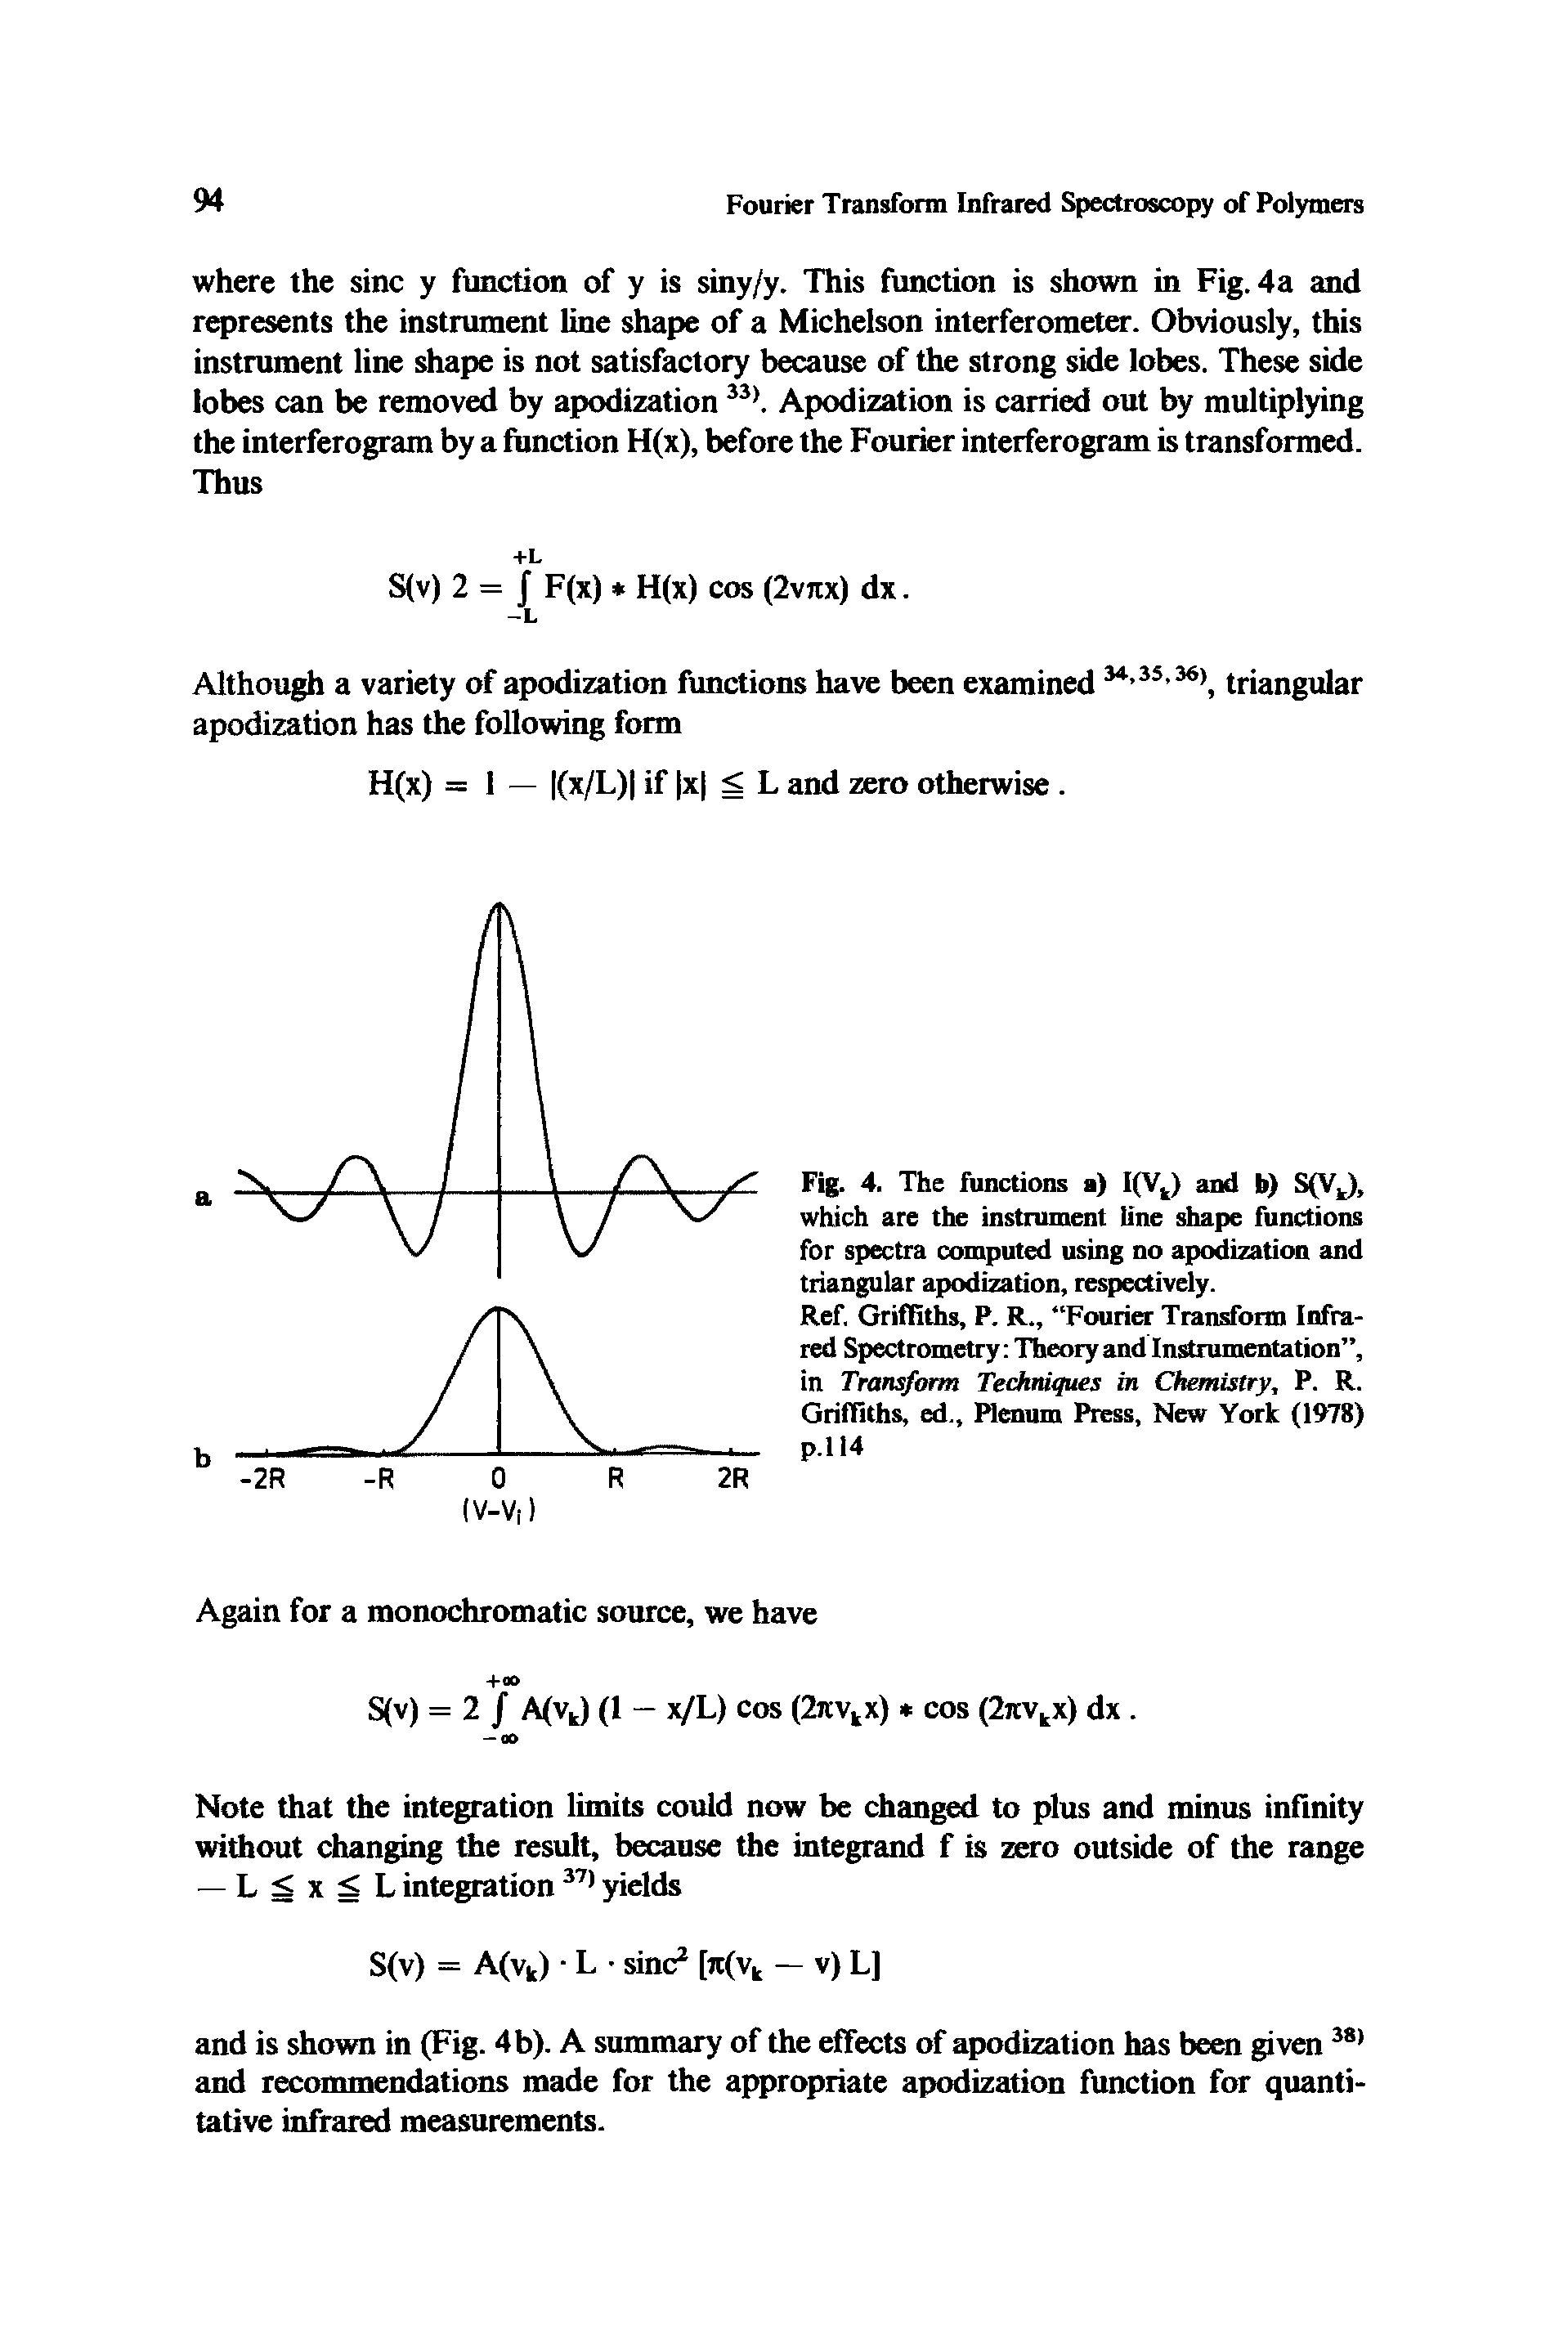 Fig. 4. The functions a) I(Vt) and b) S(Vk), which are the instrument line shape functions for spectra computed using no apodization and triangular apodization, respectively.